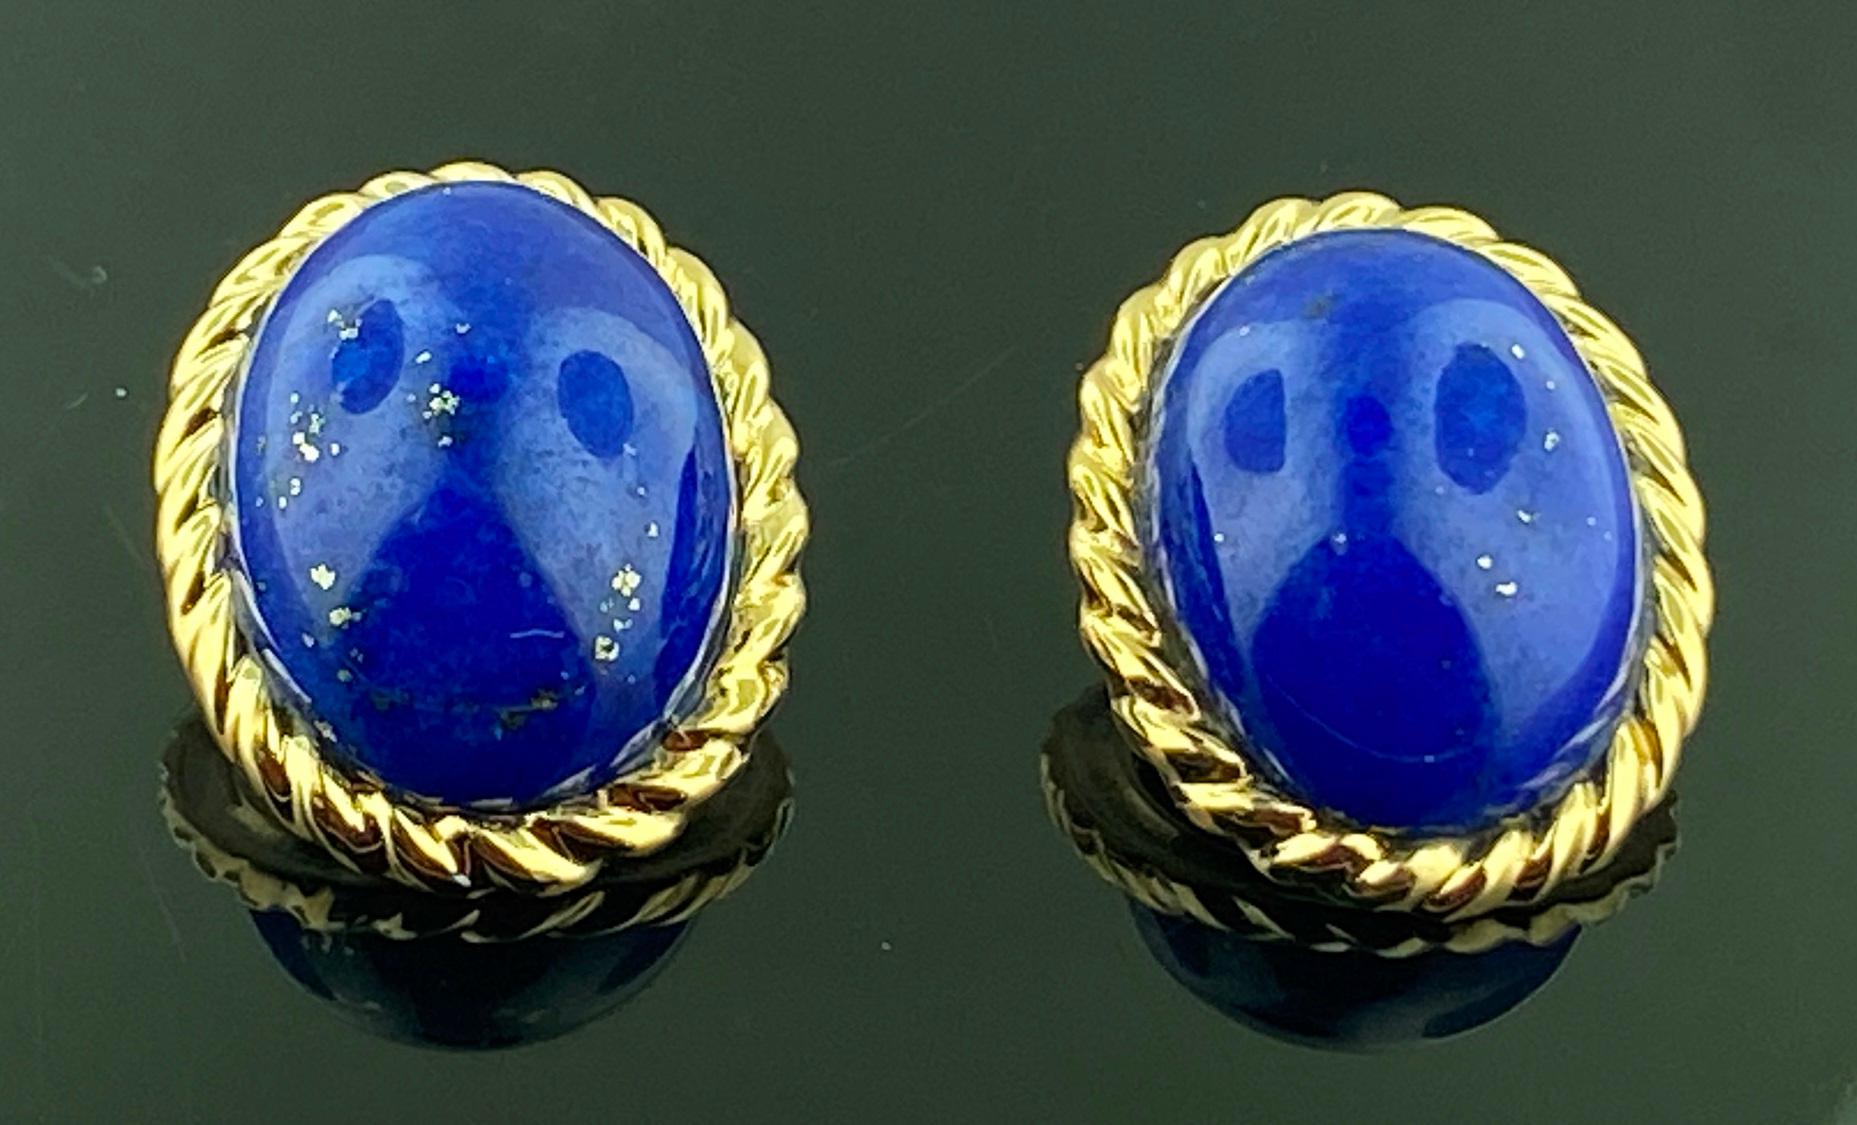 Set in 14 karat yellow gold, weighing 11 grams, are 2 Oval Cut Cabochon Lapis Lazuli earrings.